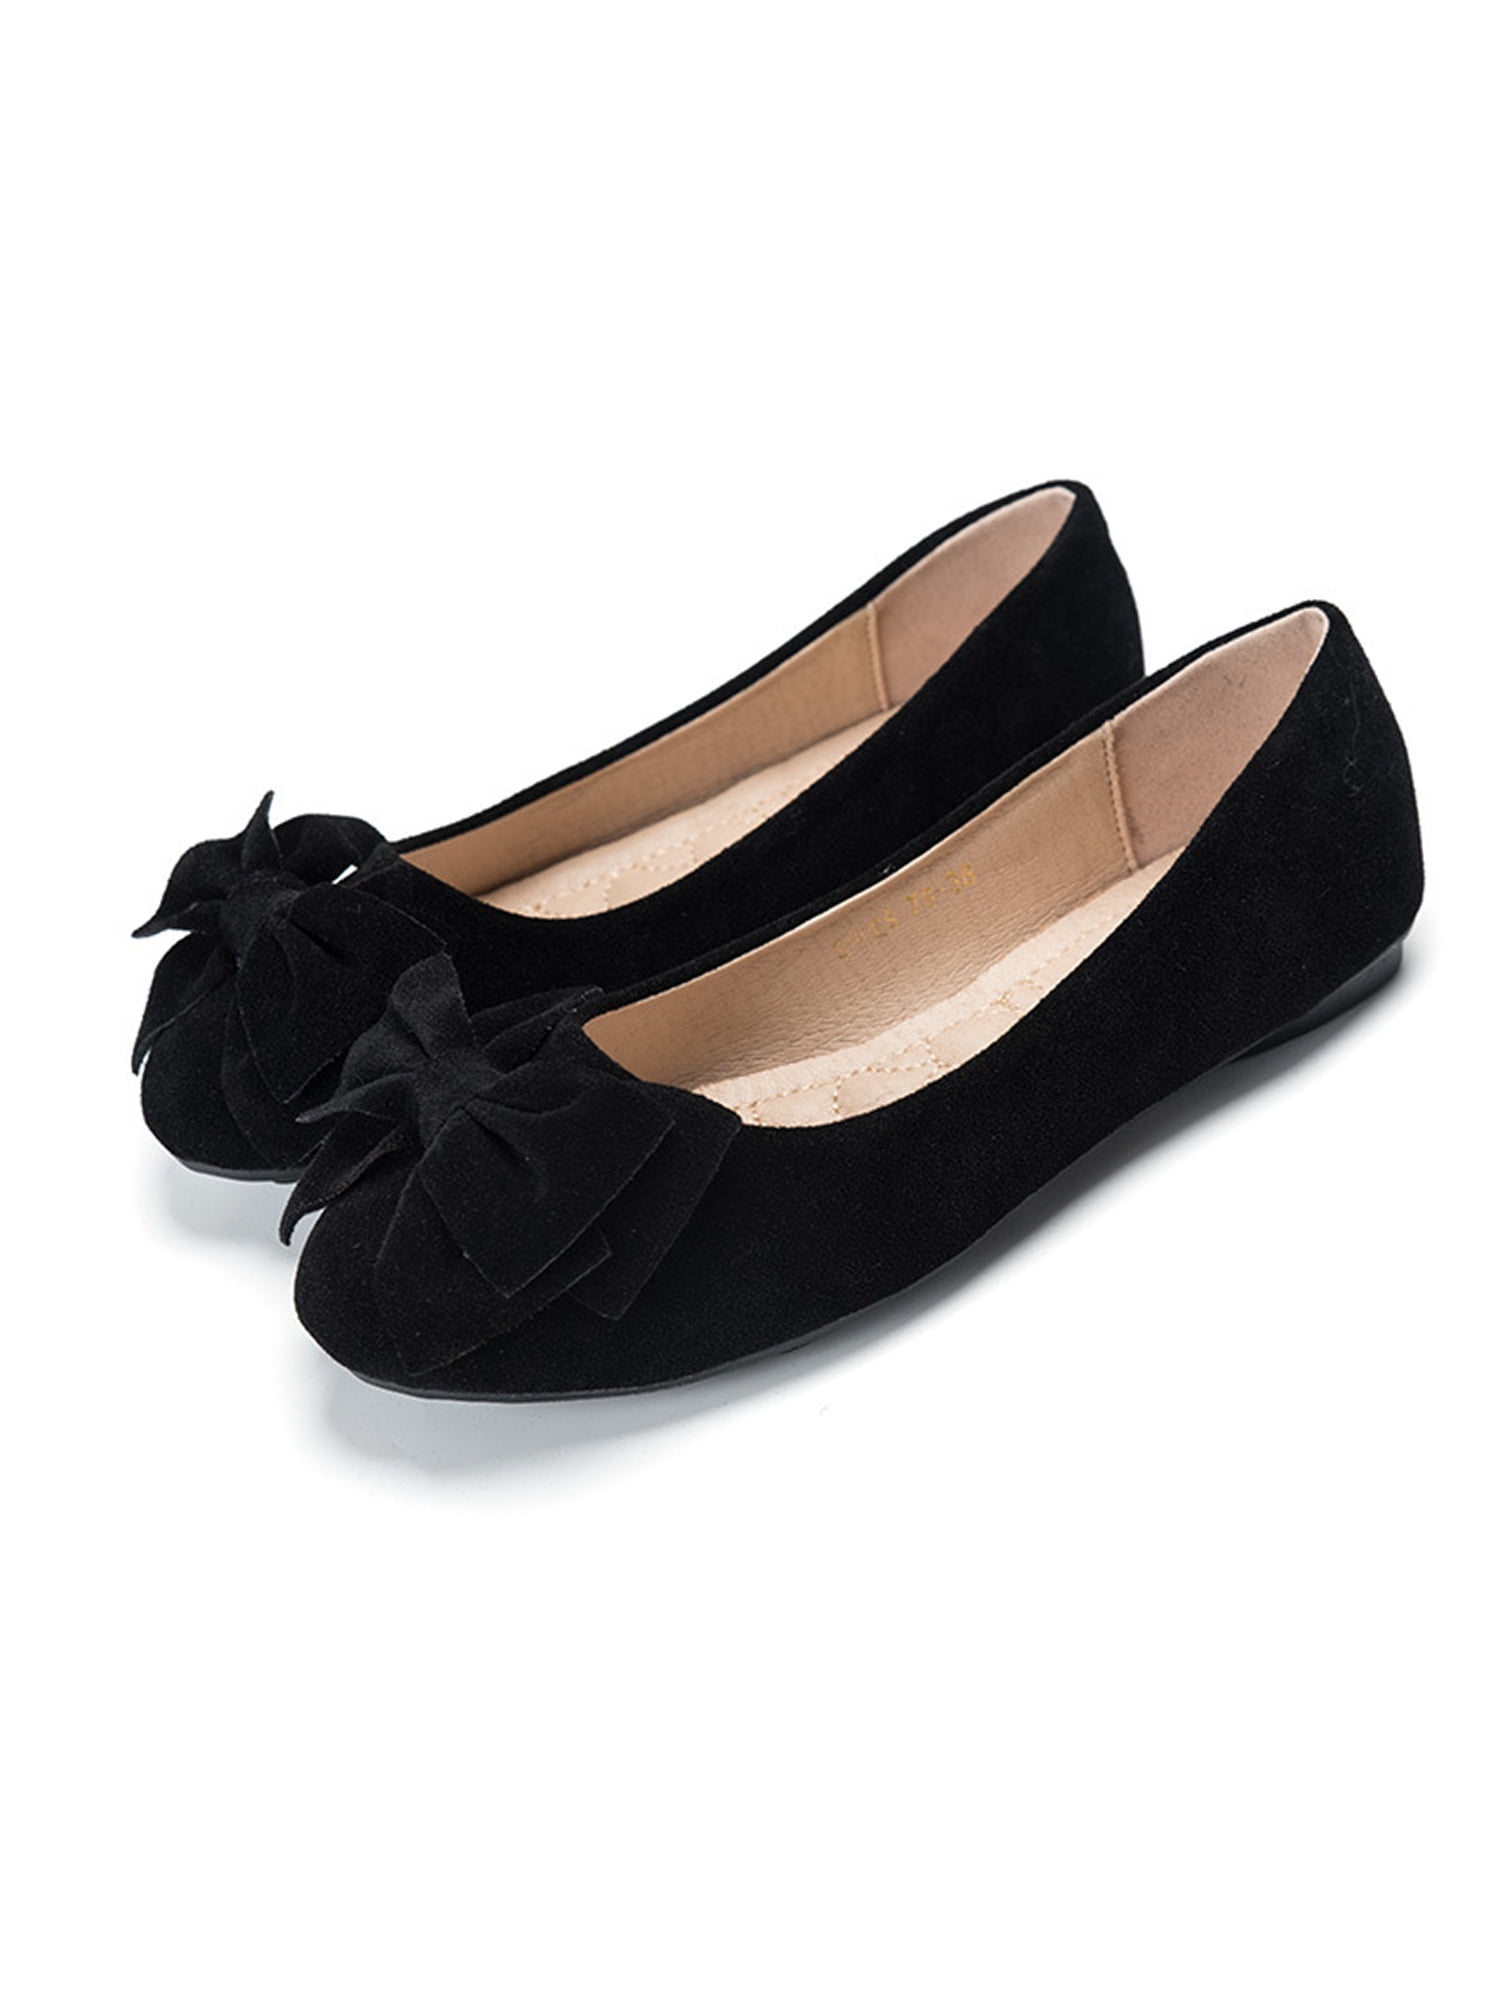 Academy Flat Loafer - Women - Shoes